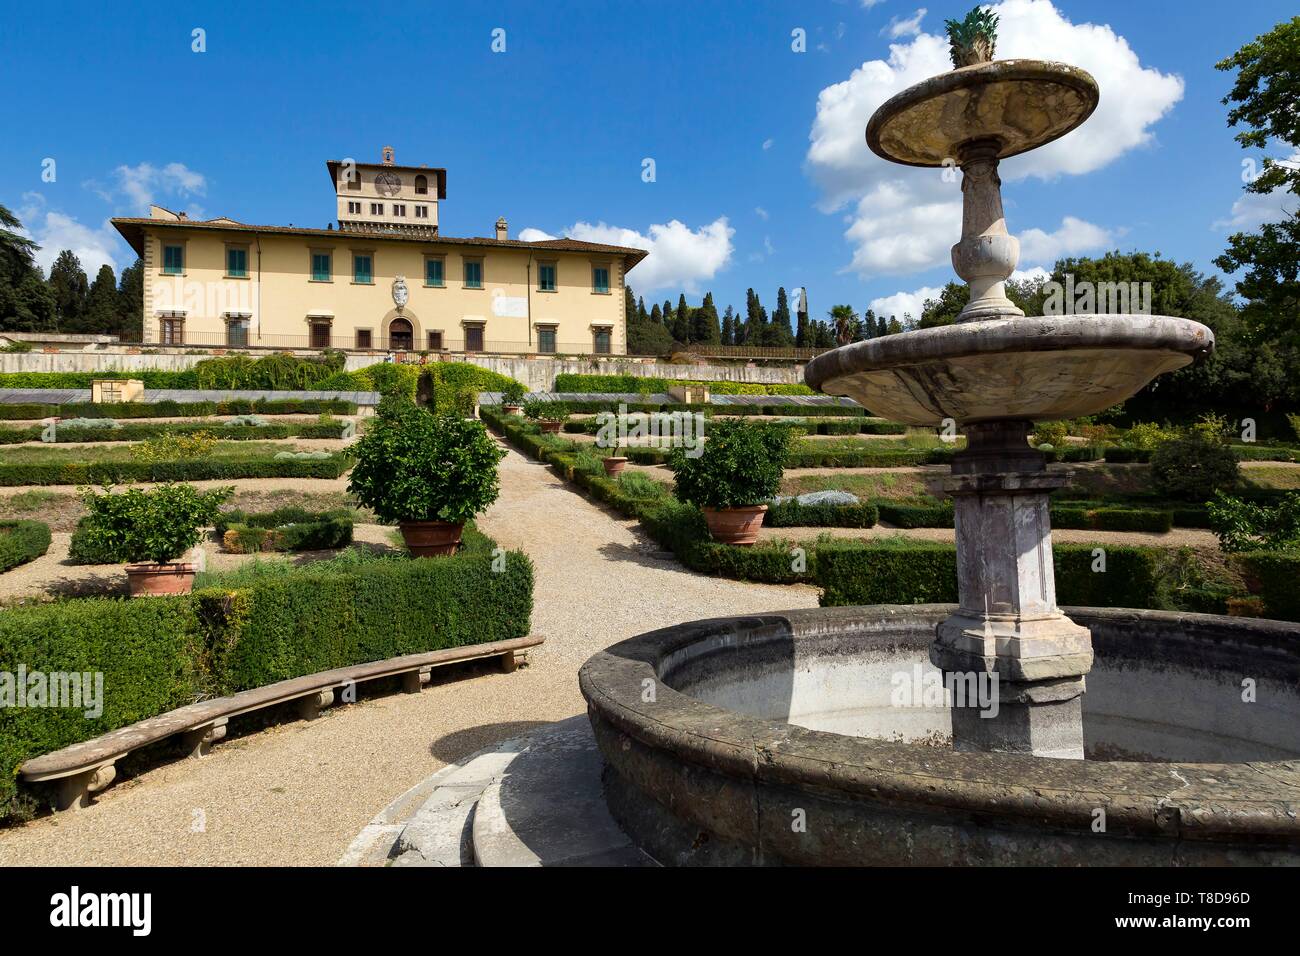 Italy, Tuscany, Florence, historic centre listed as World Heritage by UNESCO, Villa Medicea La Petraia is a medicean villa located in the hilly area of Castello Stock Photo